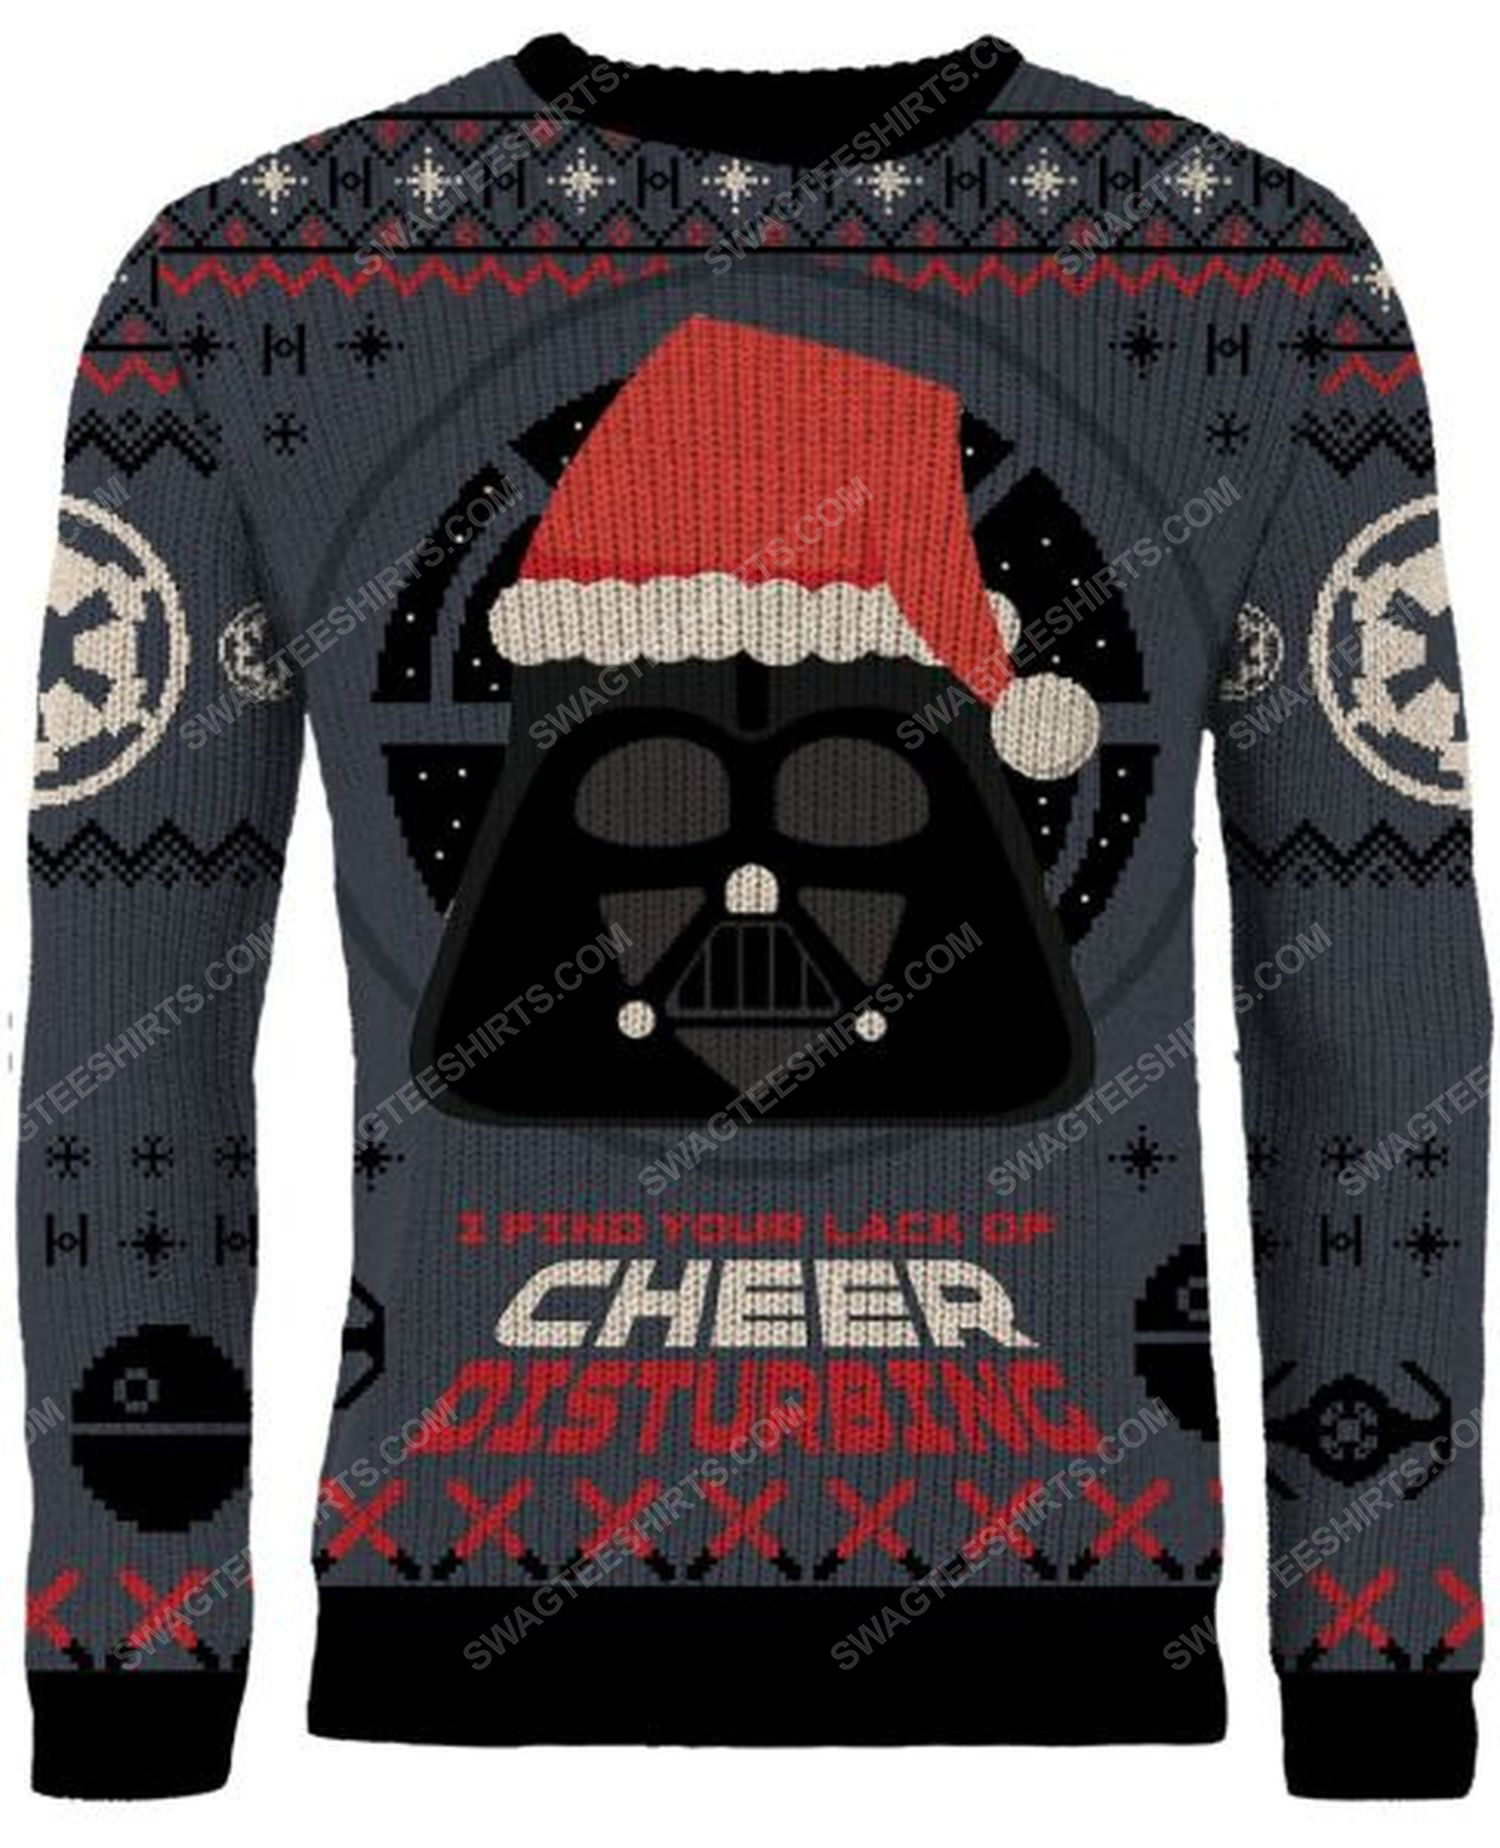 Star wars i find your lack of cheer disturbing full print ugly christmas sweater 2 - Copy (3)